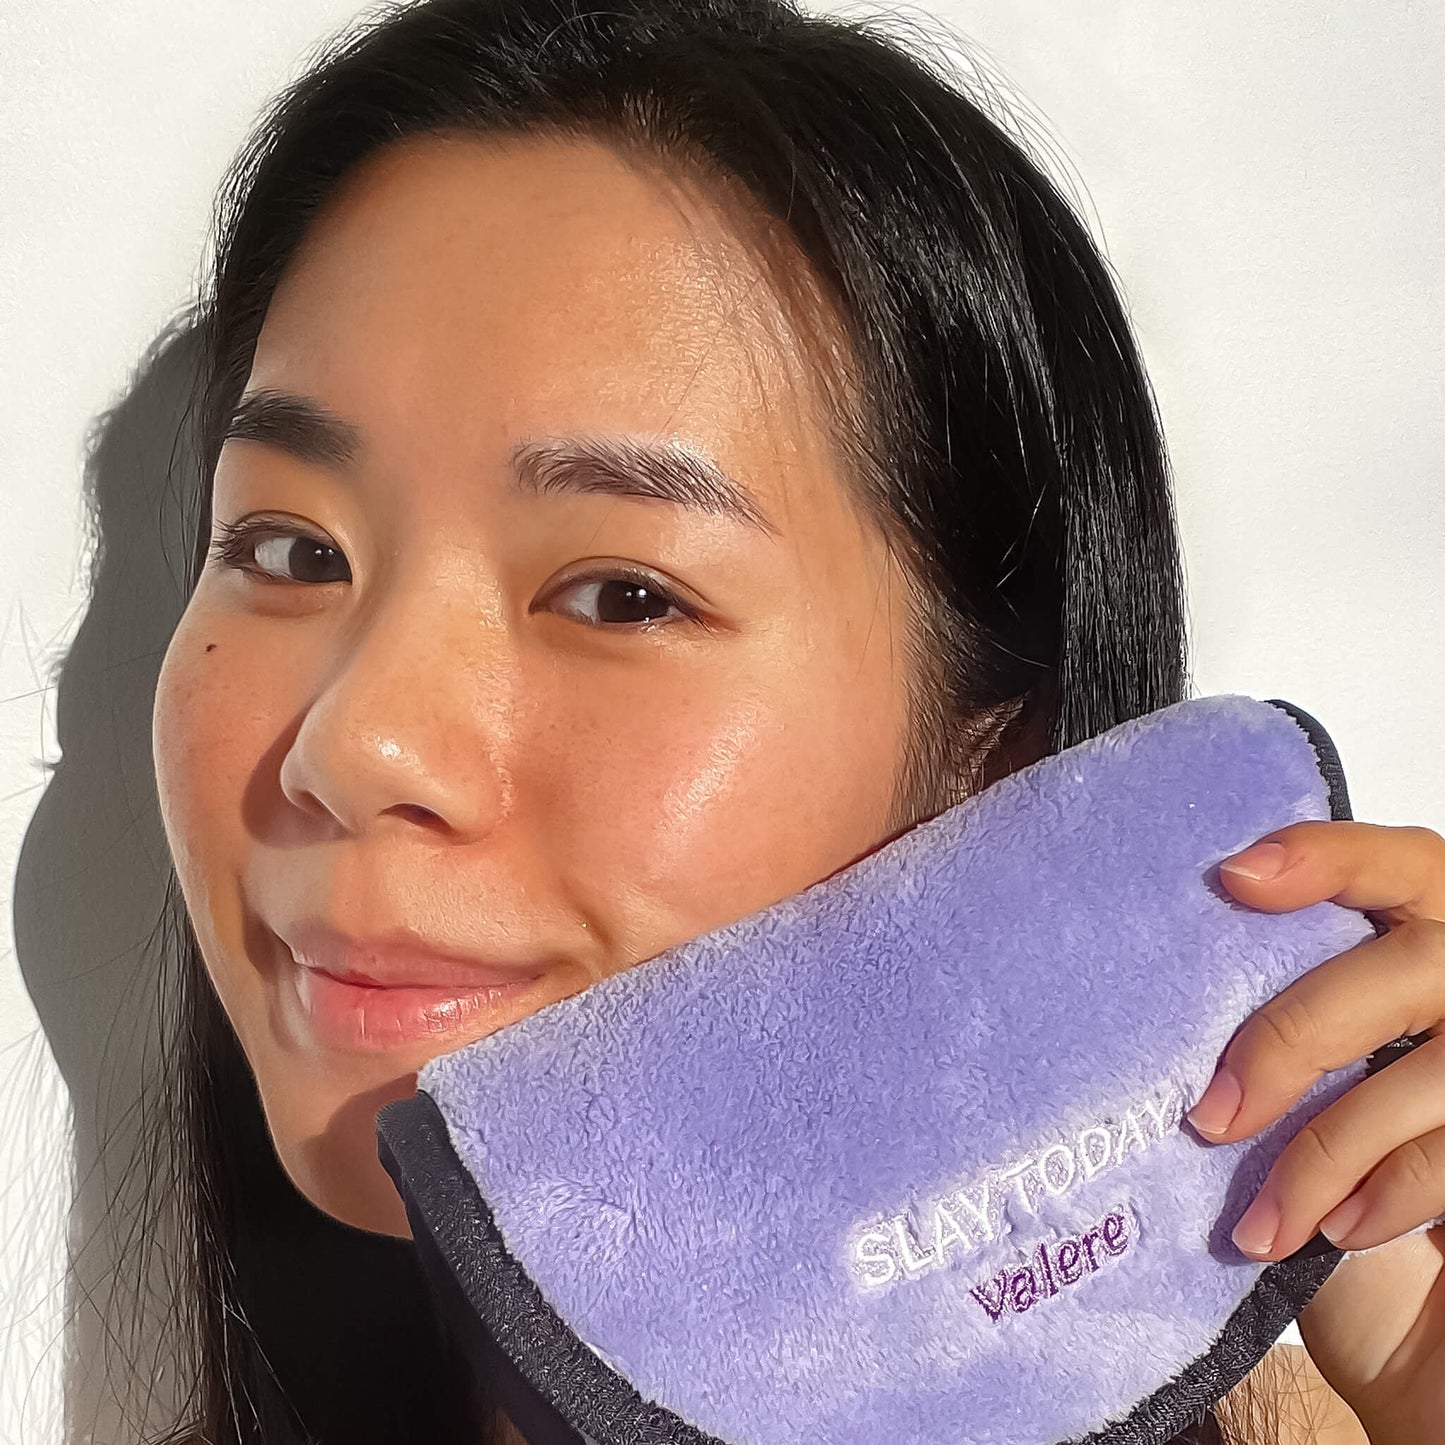 Girl using Valere Beauty Oh! So Soft Toner & Cleansing Cloth Microfiber Makeup Remover Cloth and Bamboo Cotton Toner Cloth Double Bundle